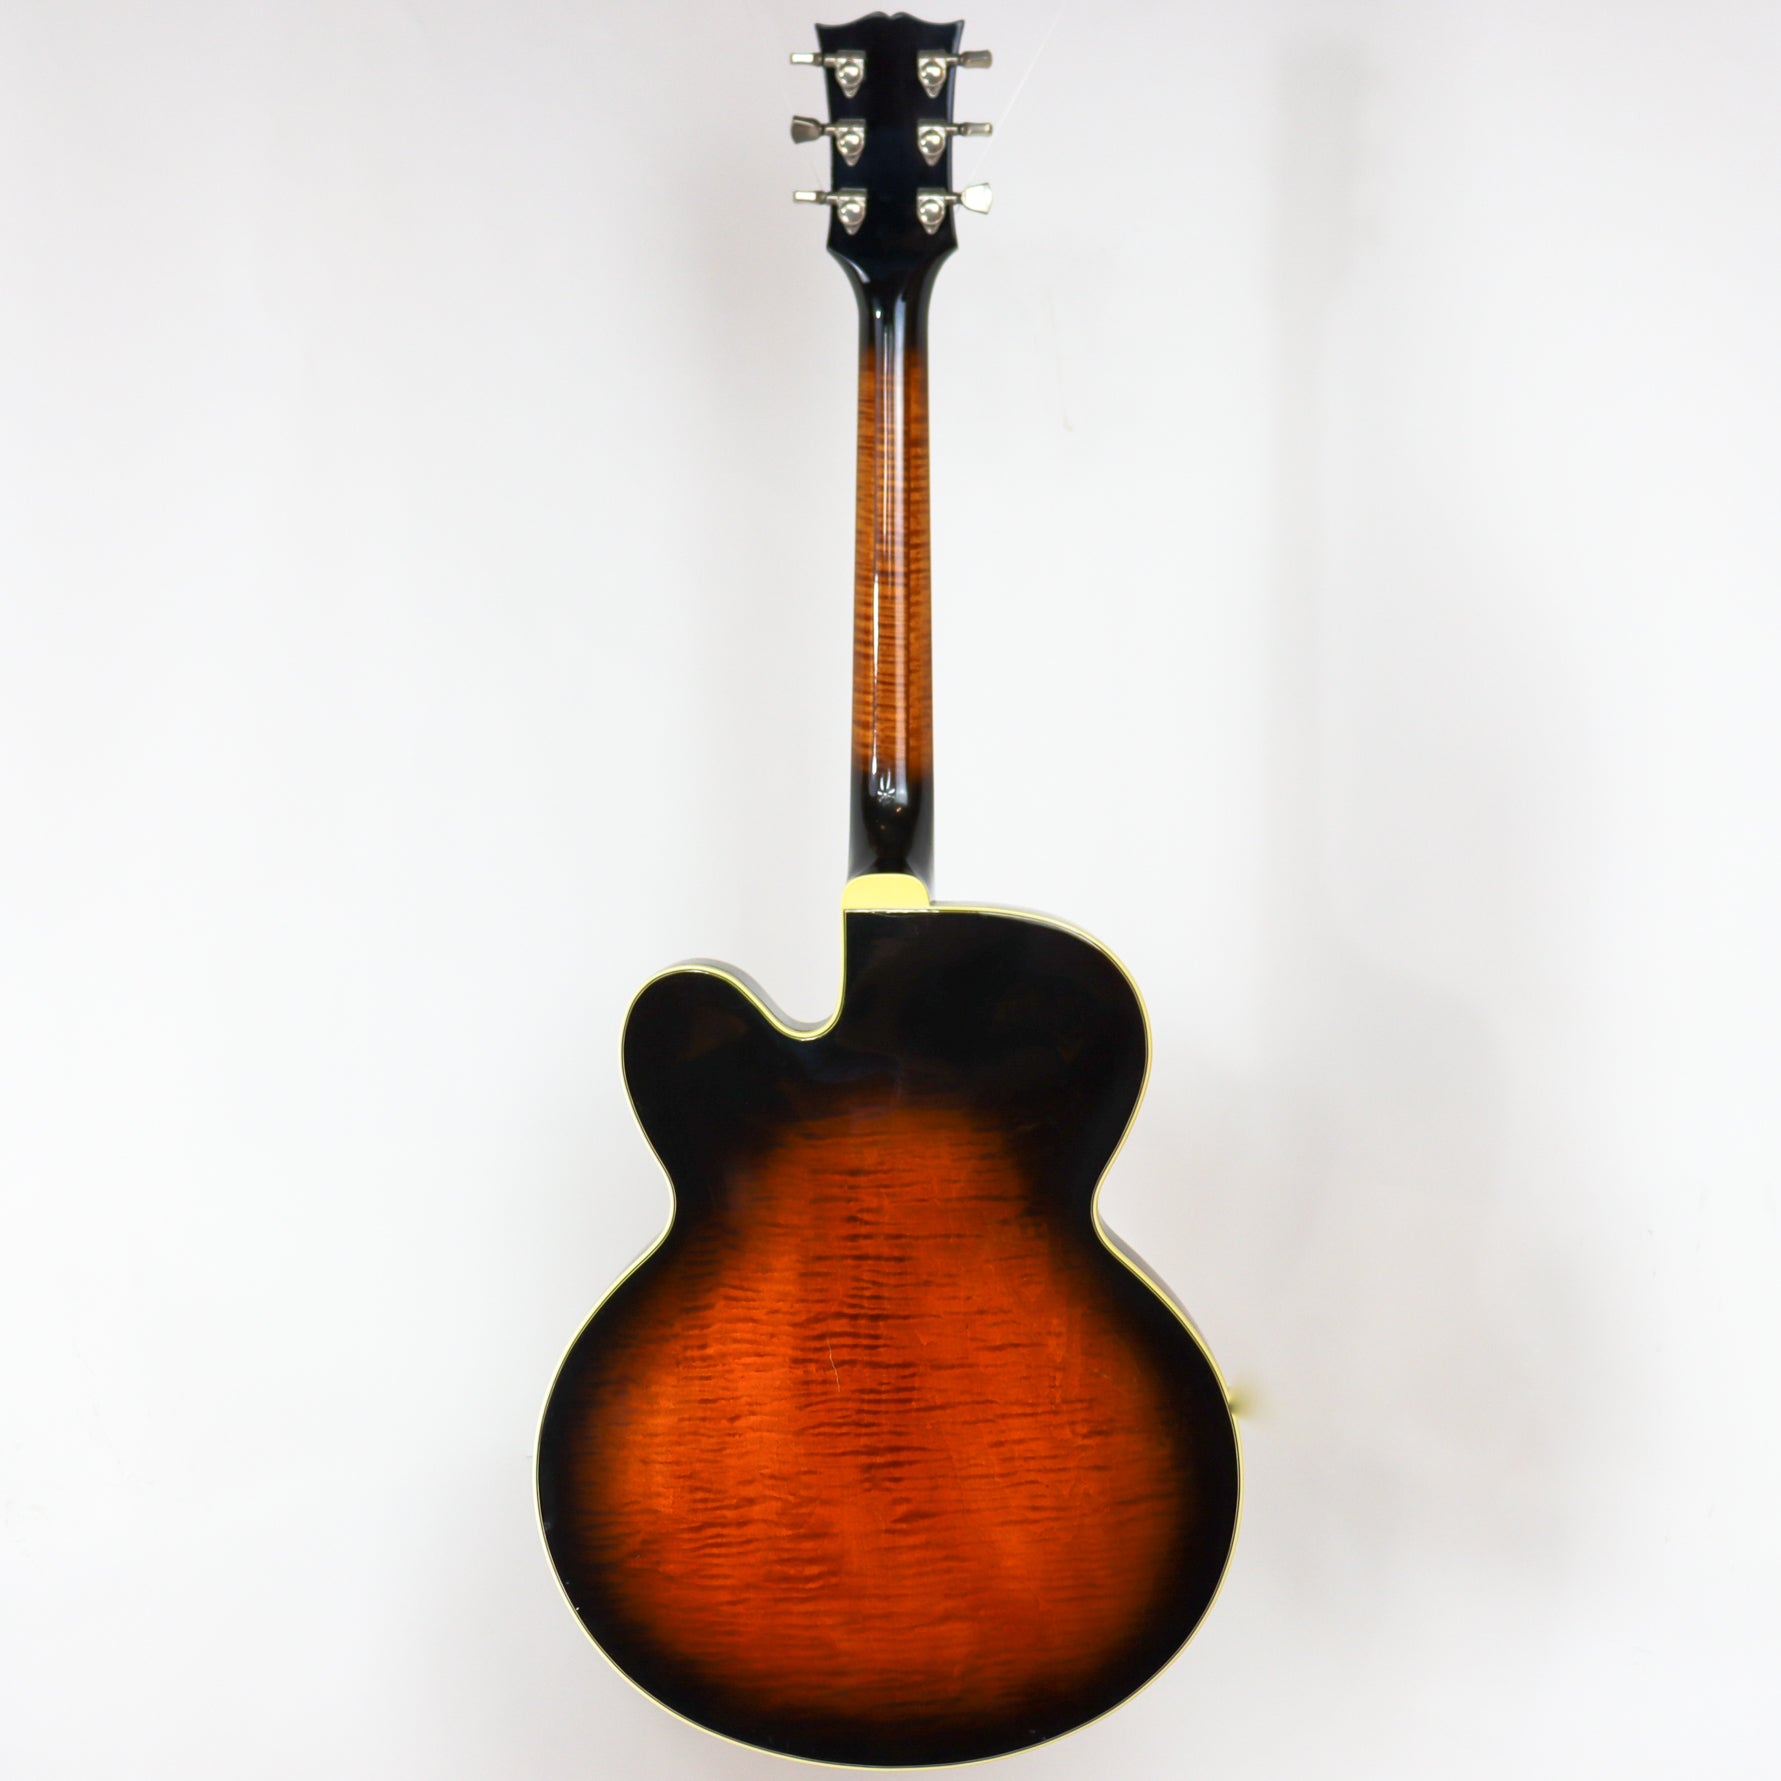 Gibson 1993 Tal Farlow in Sunburst - Personally Owned by Tal Farlow